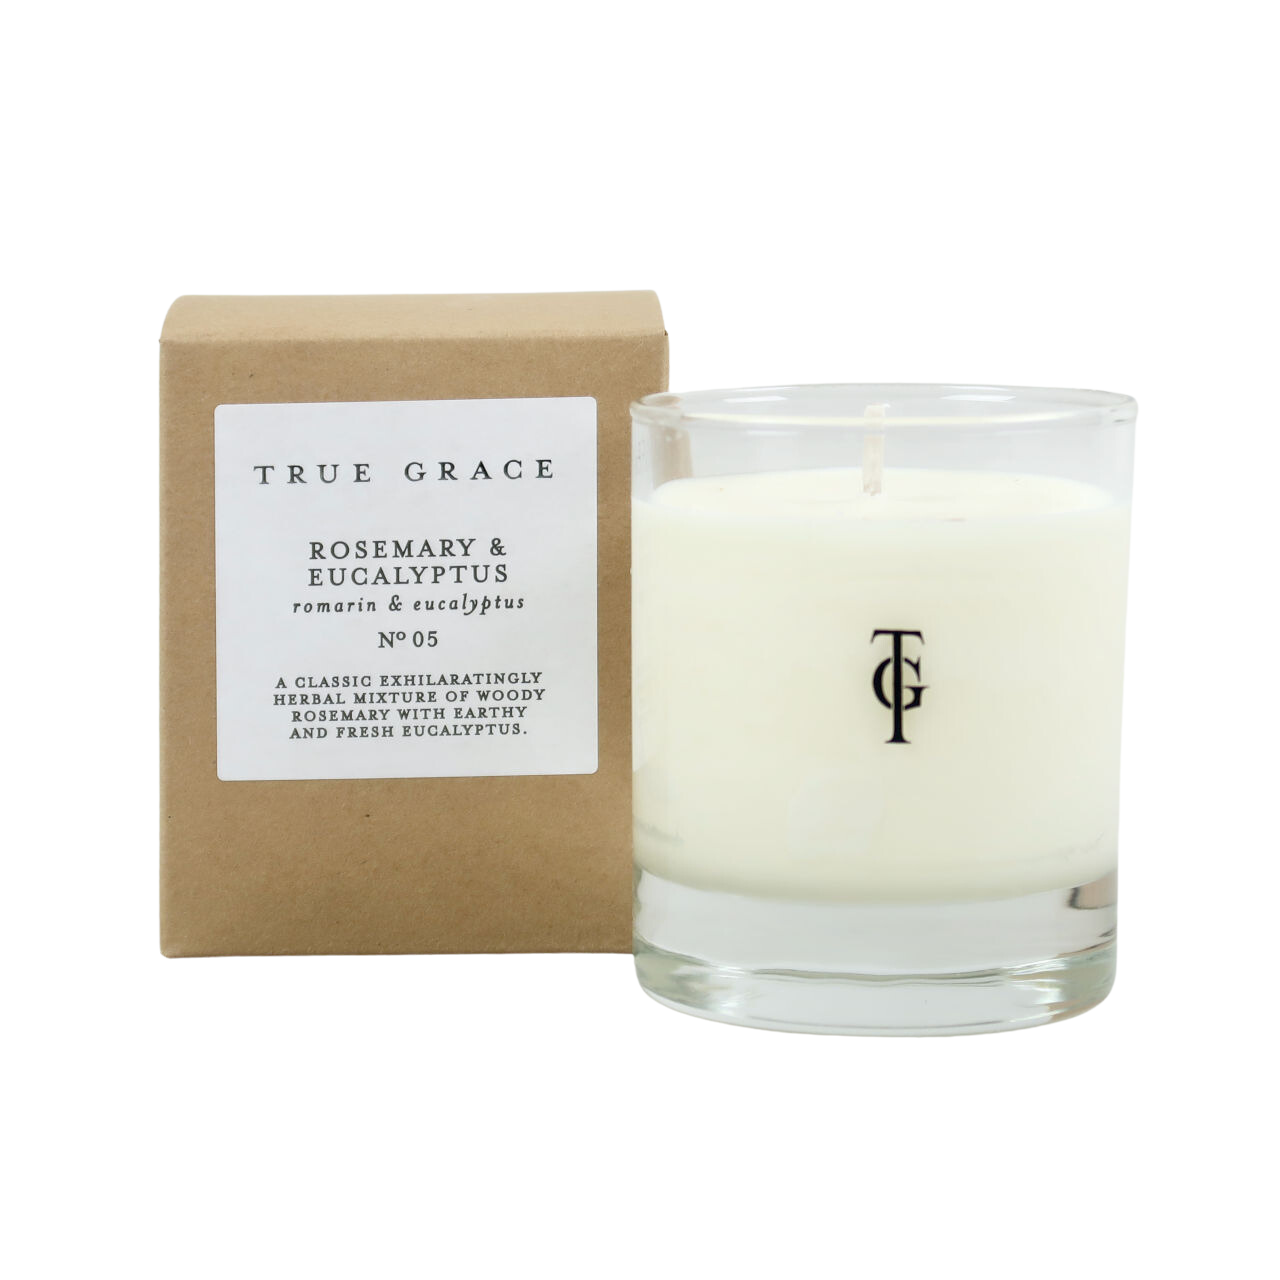 True Grace Rosemary & Euculyptus Scented Small Candle